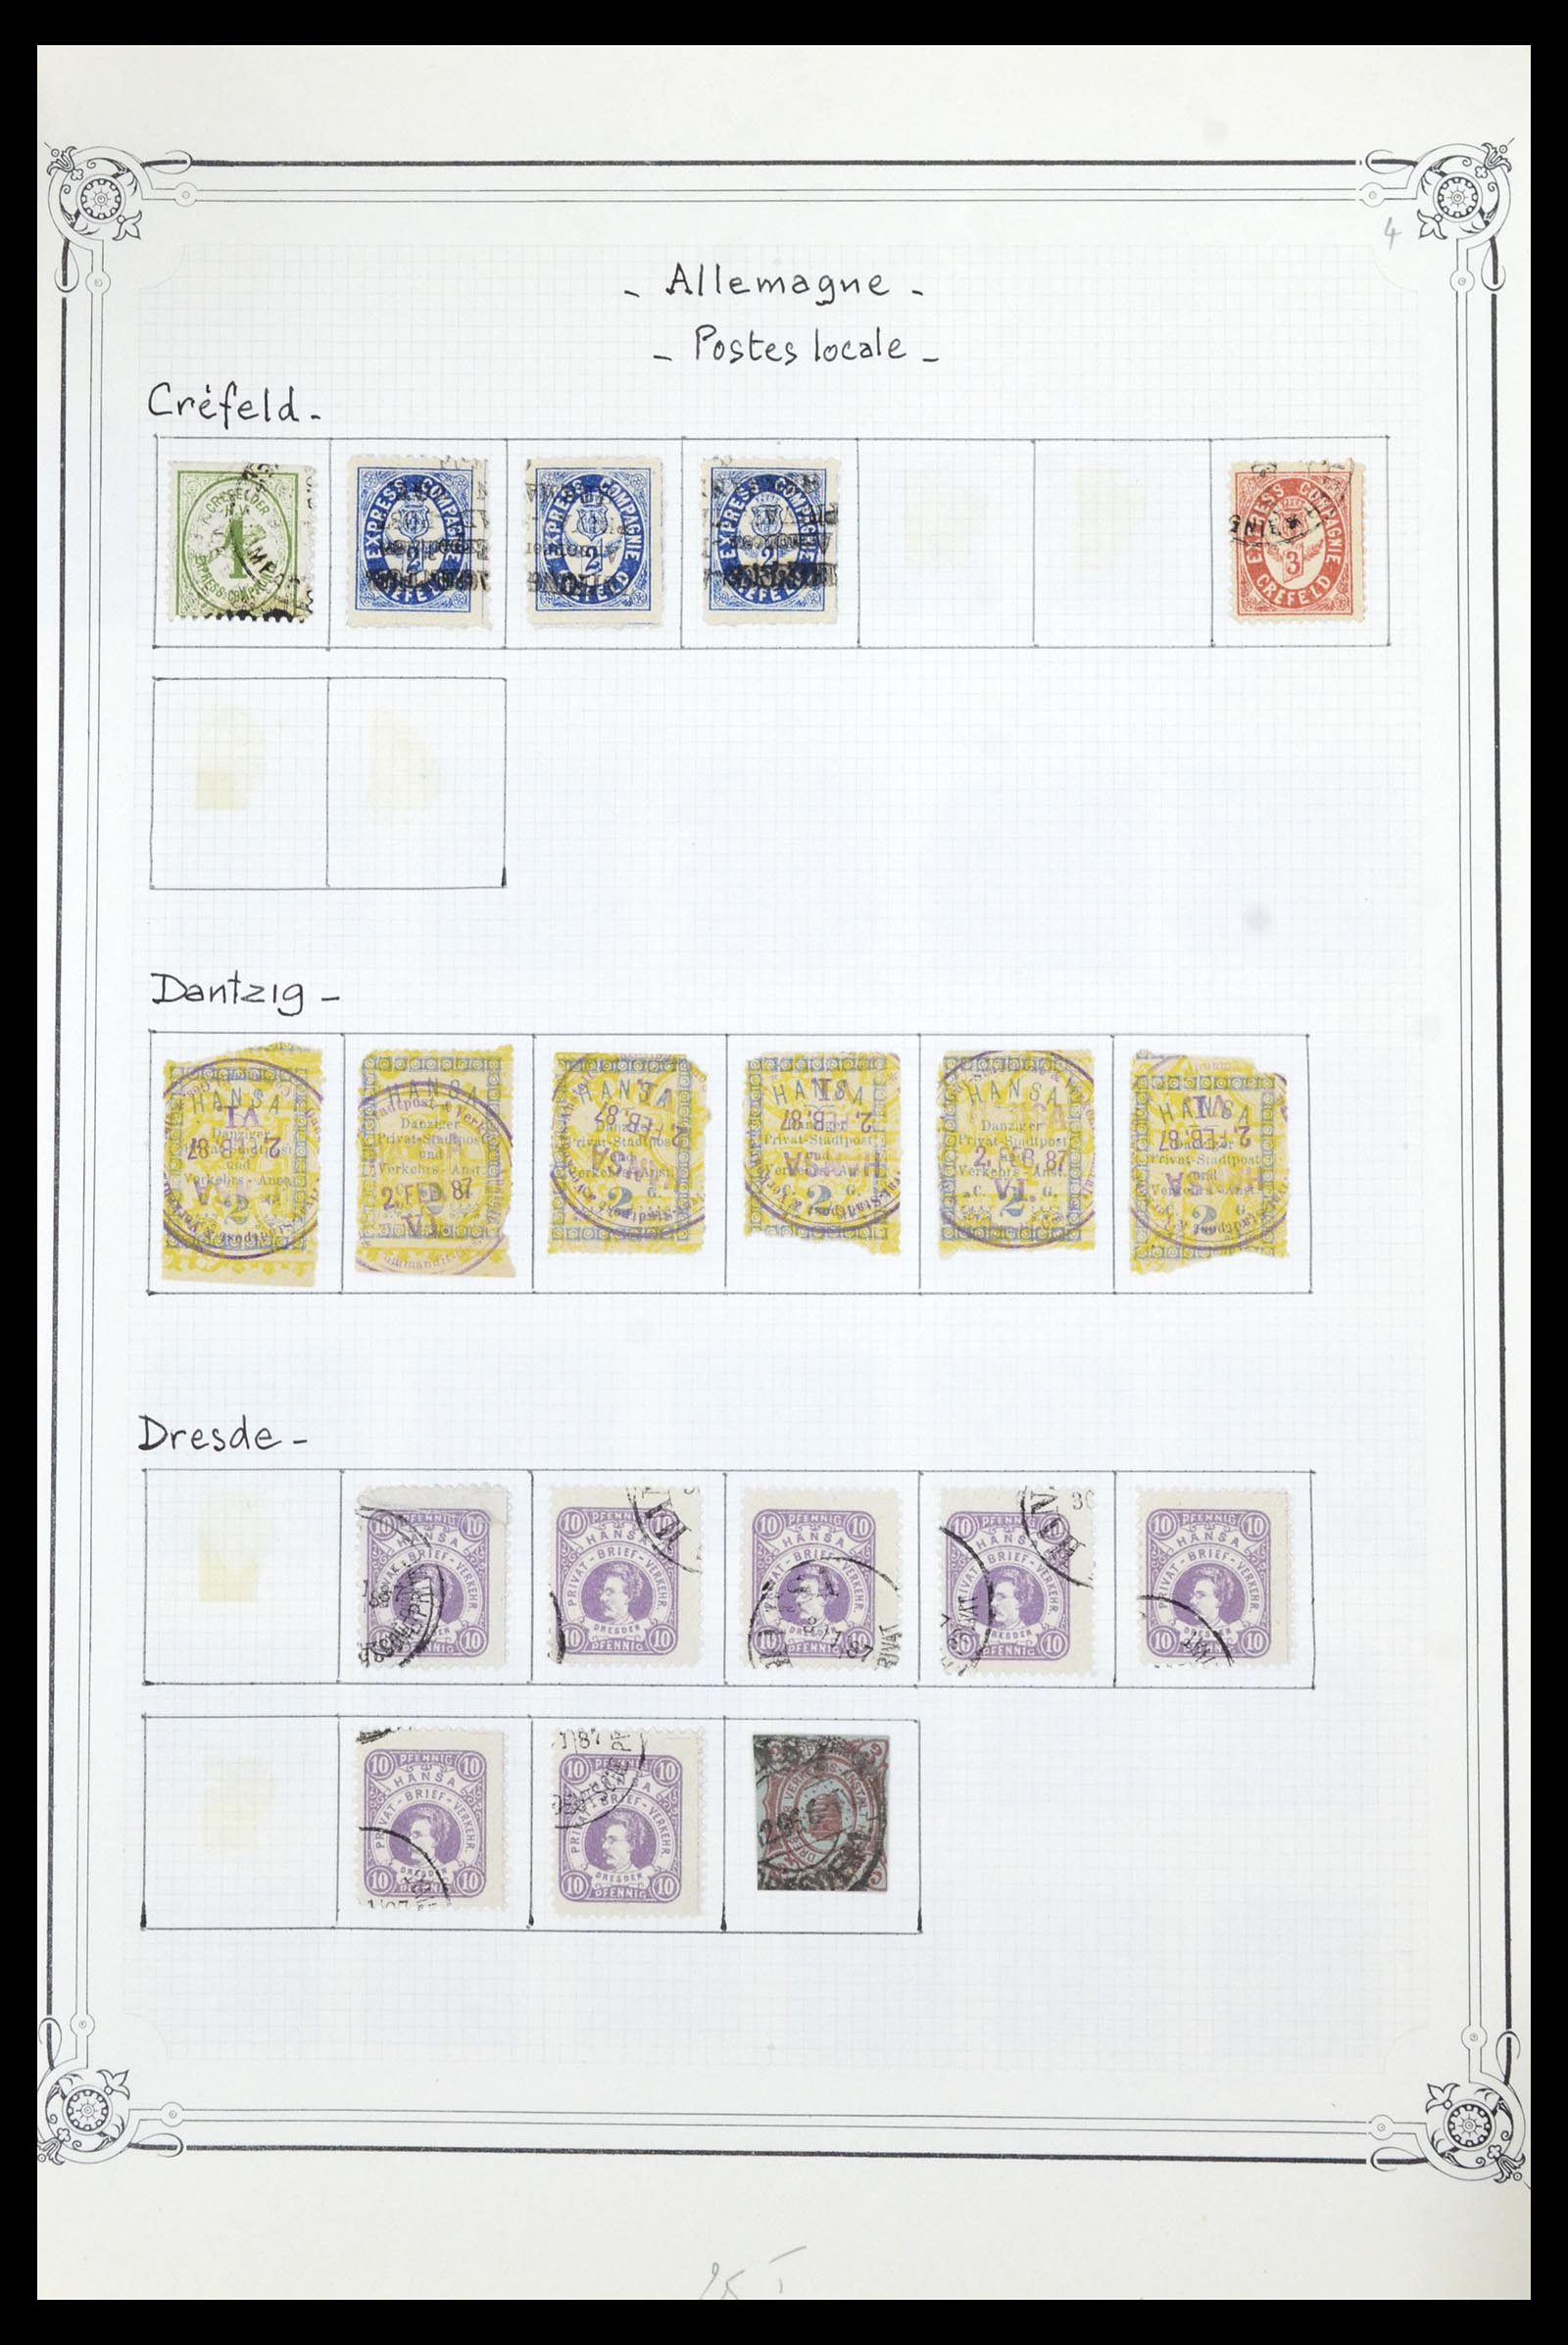 36972 004 - Stamp collection 36972 Germany local post 1880-1900.